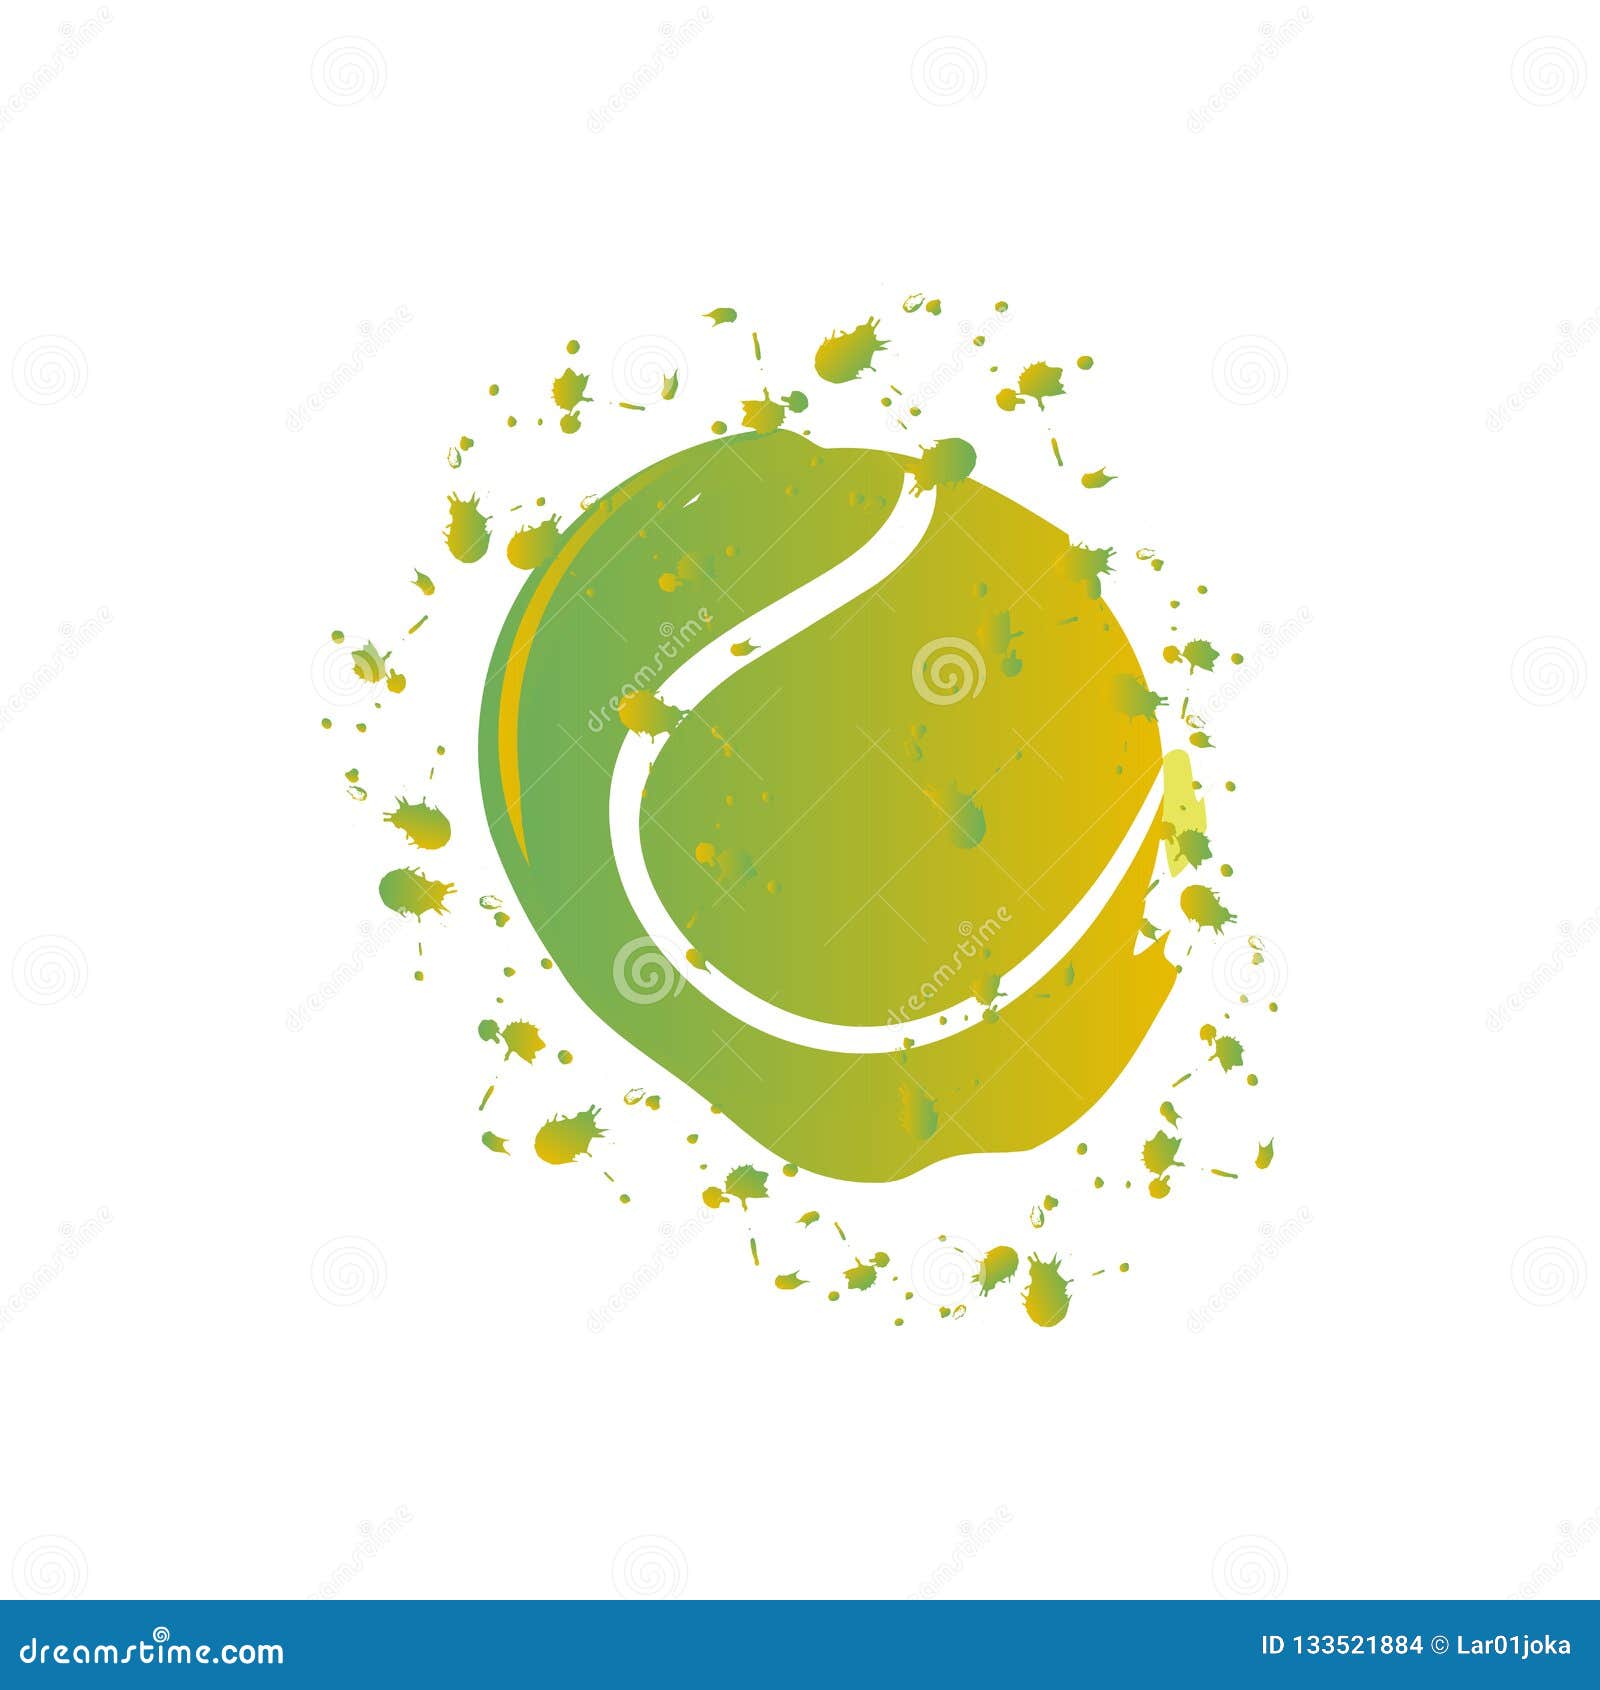 Download Watercolor Effect Of A Tennis Ball Stock Vector - Illustration of ball, round: 133521884